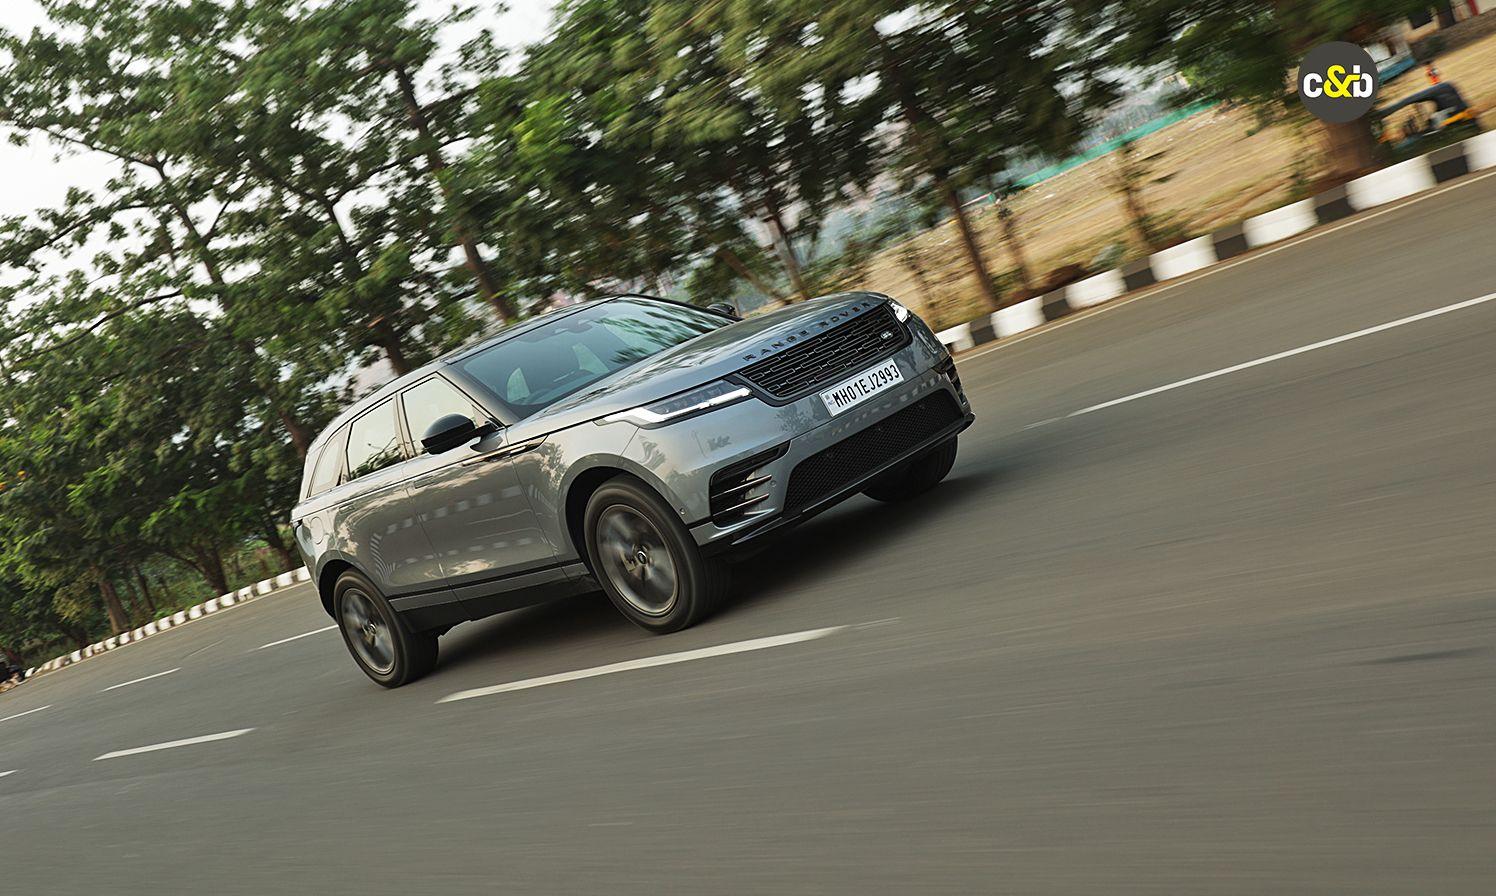 MY 2024 Range Rover Velar is the first midlife facelift for the compact luxury SUV that brings in new features with a more minimalist, yet comfier cabin.